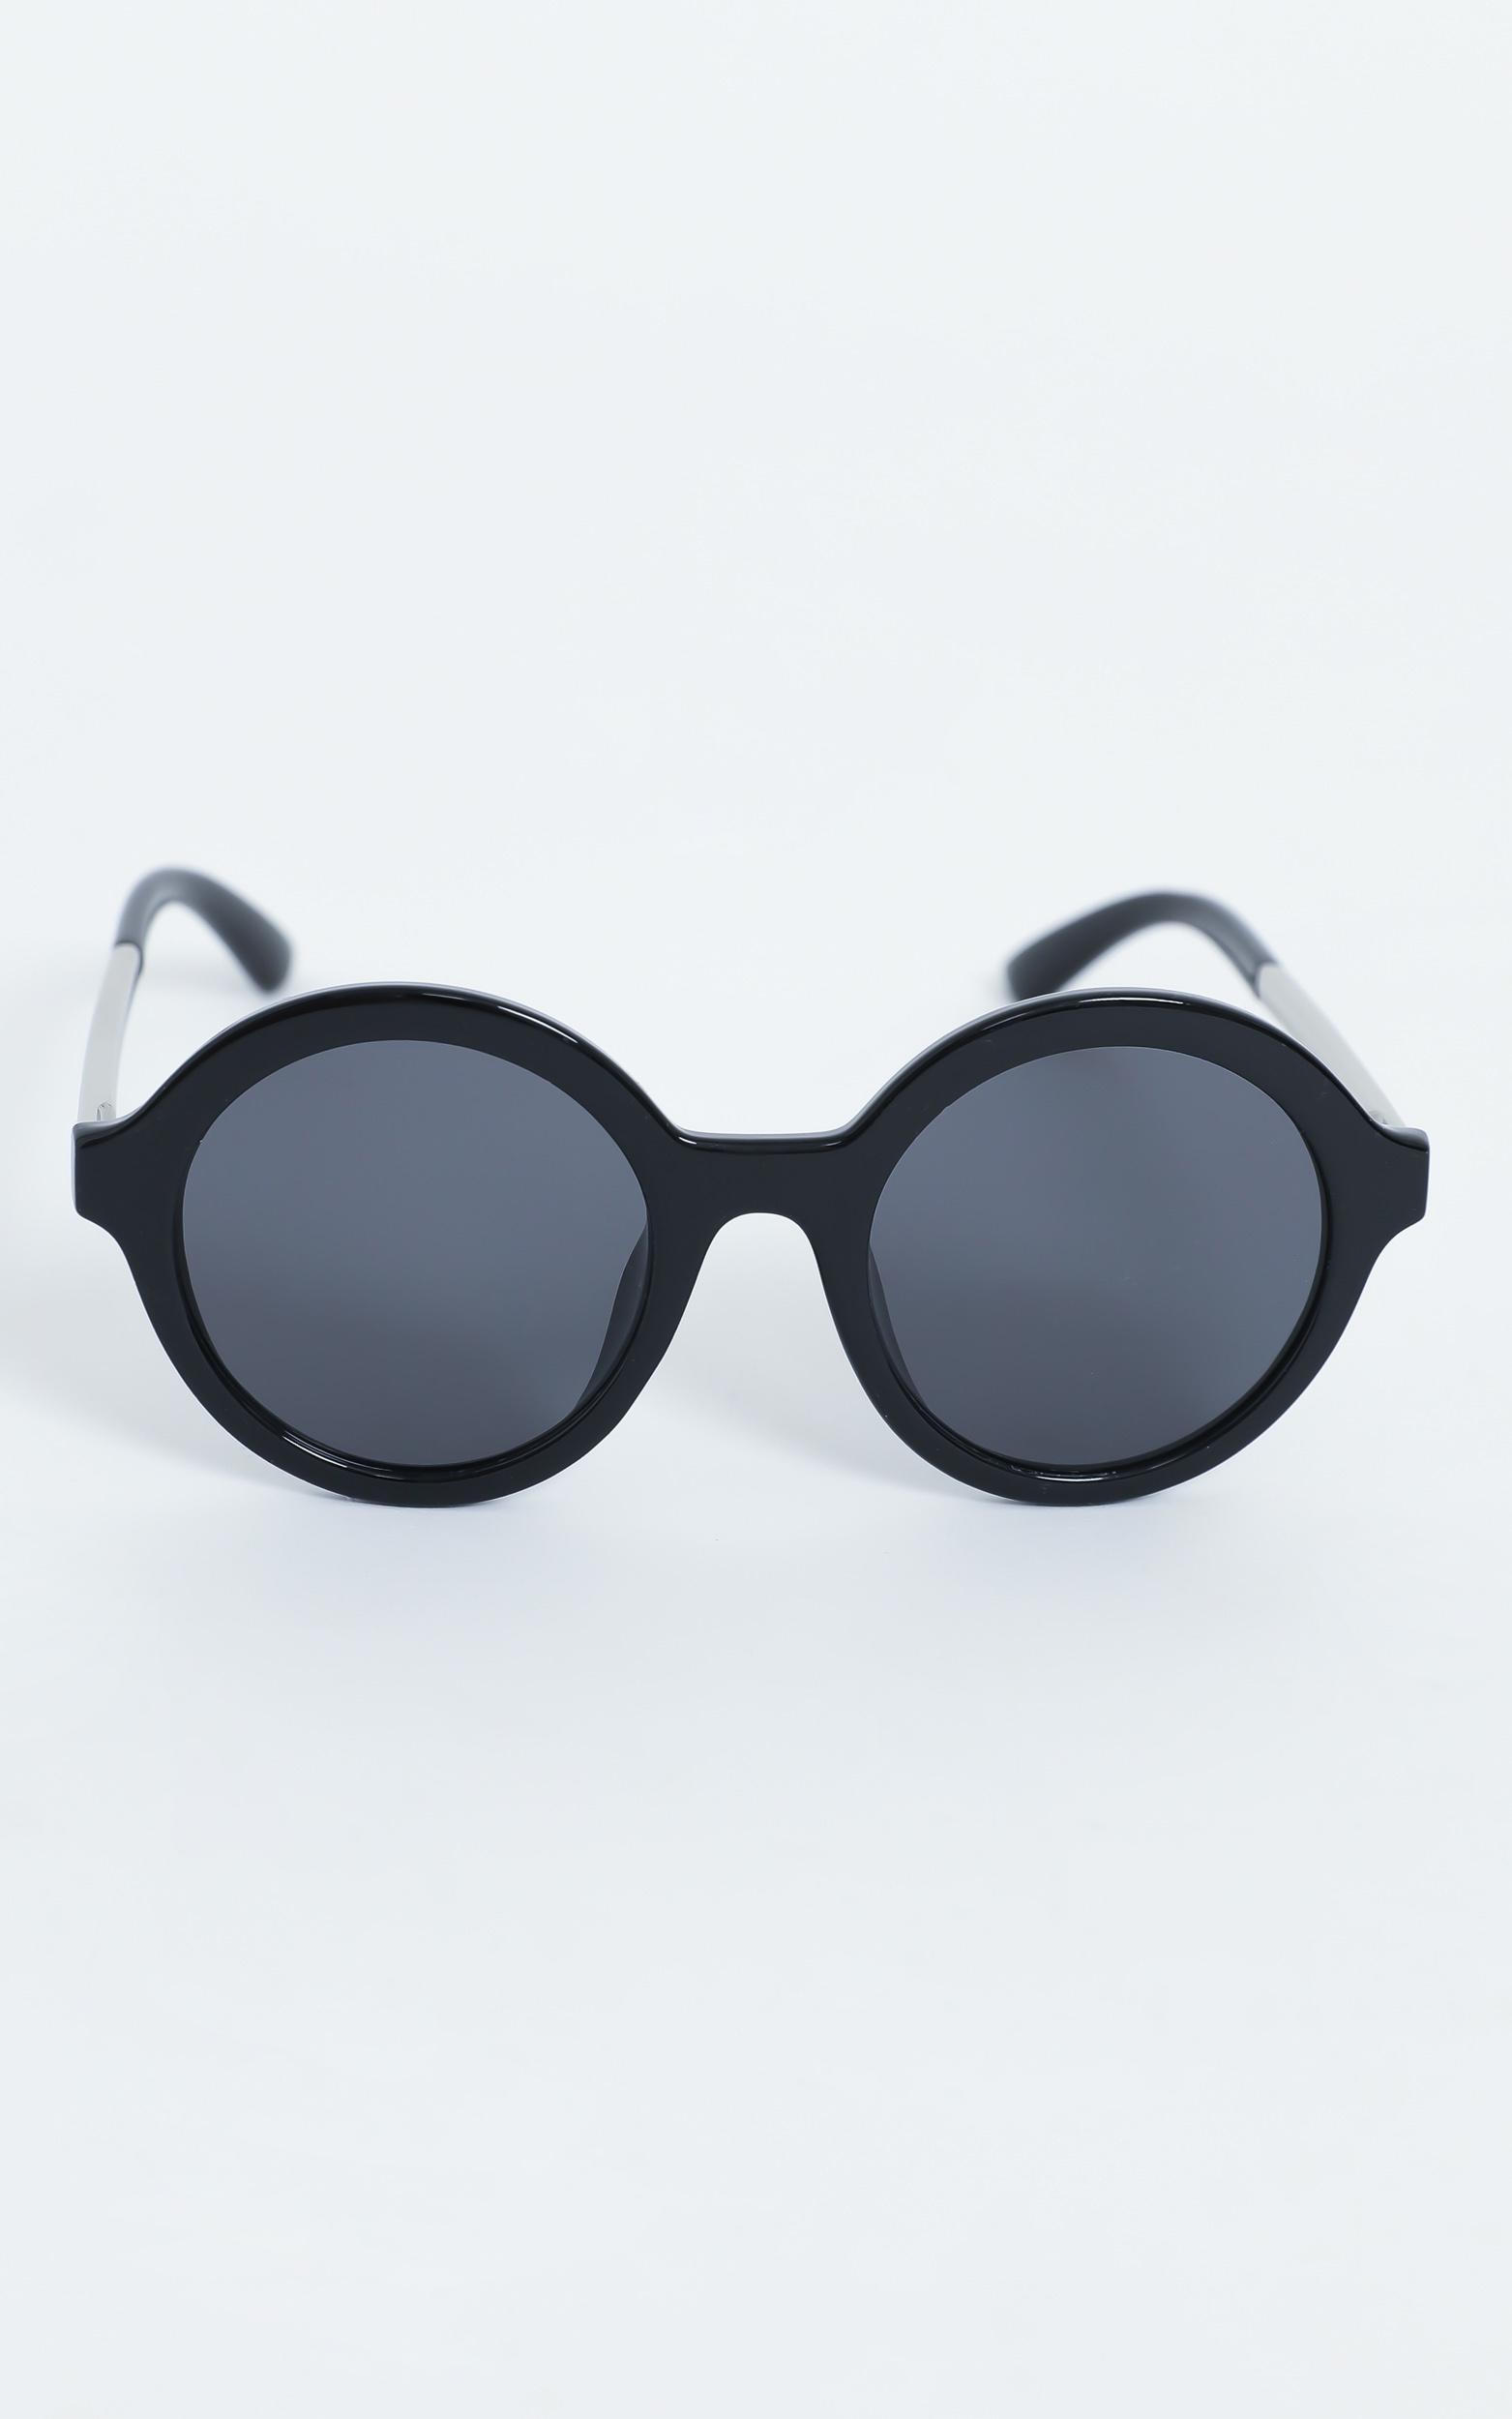 Reality Eyewear - Mind Bomb Sunglasses in Black, , hi-res image number null